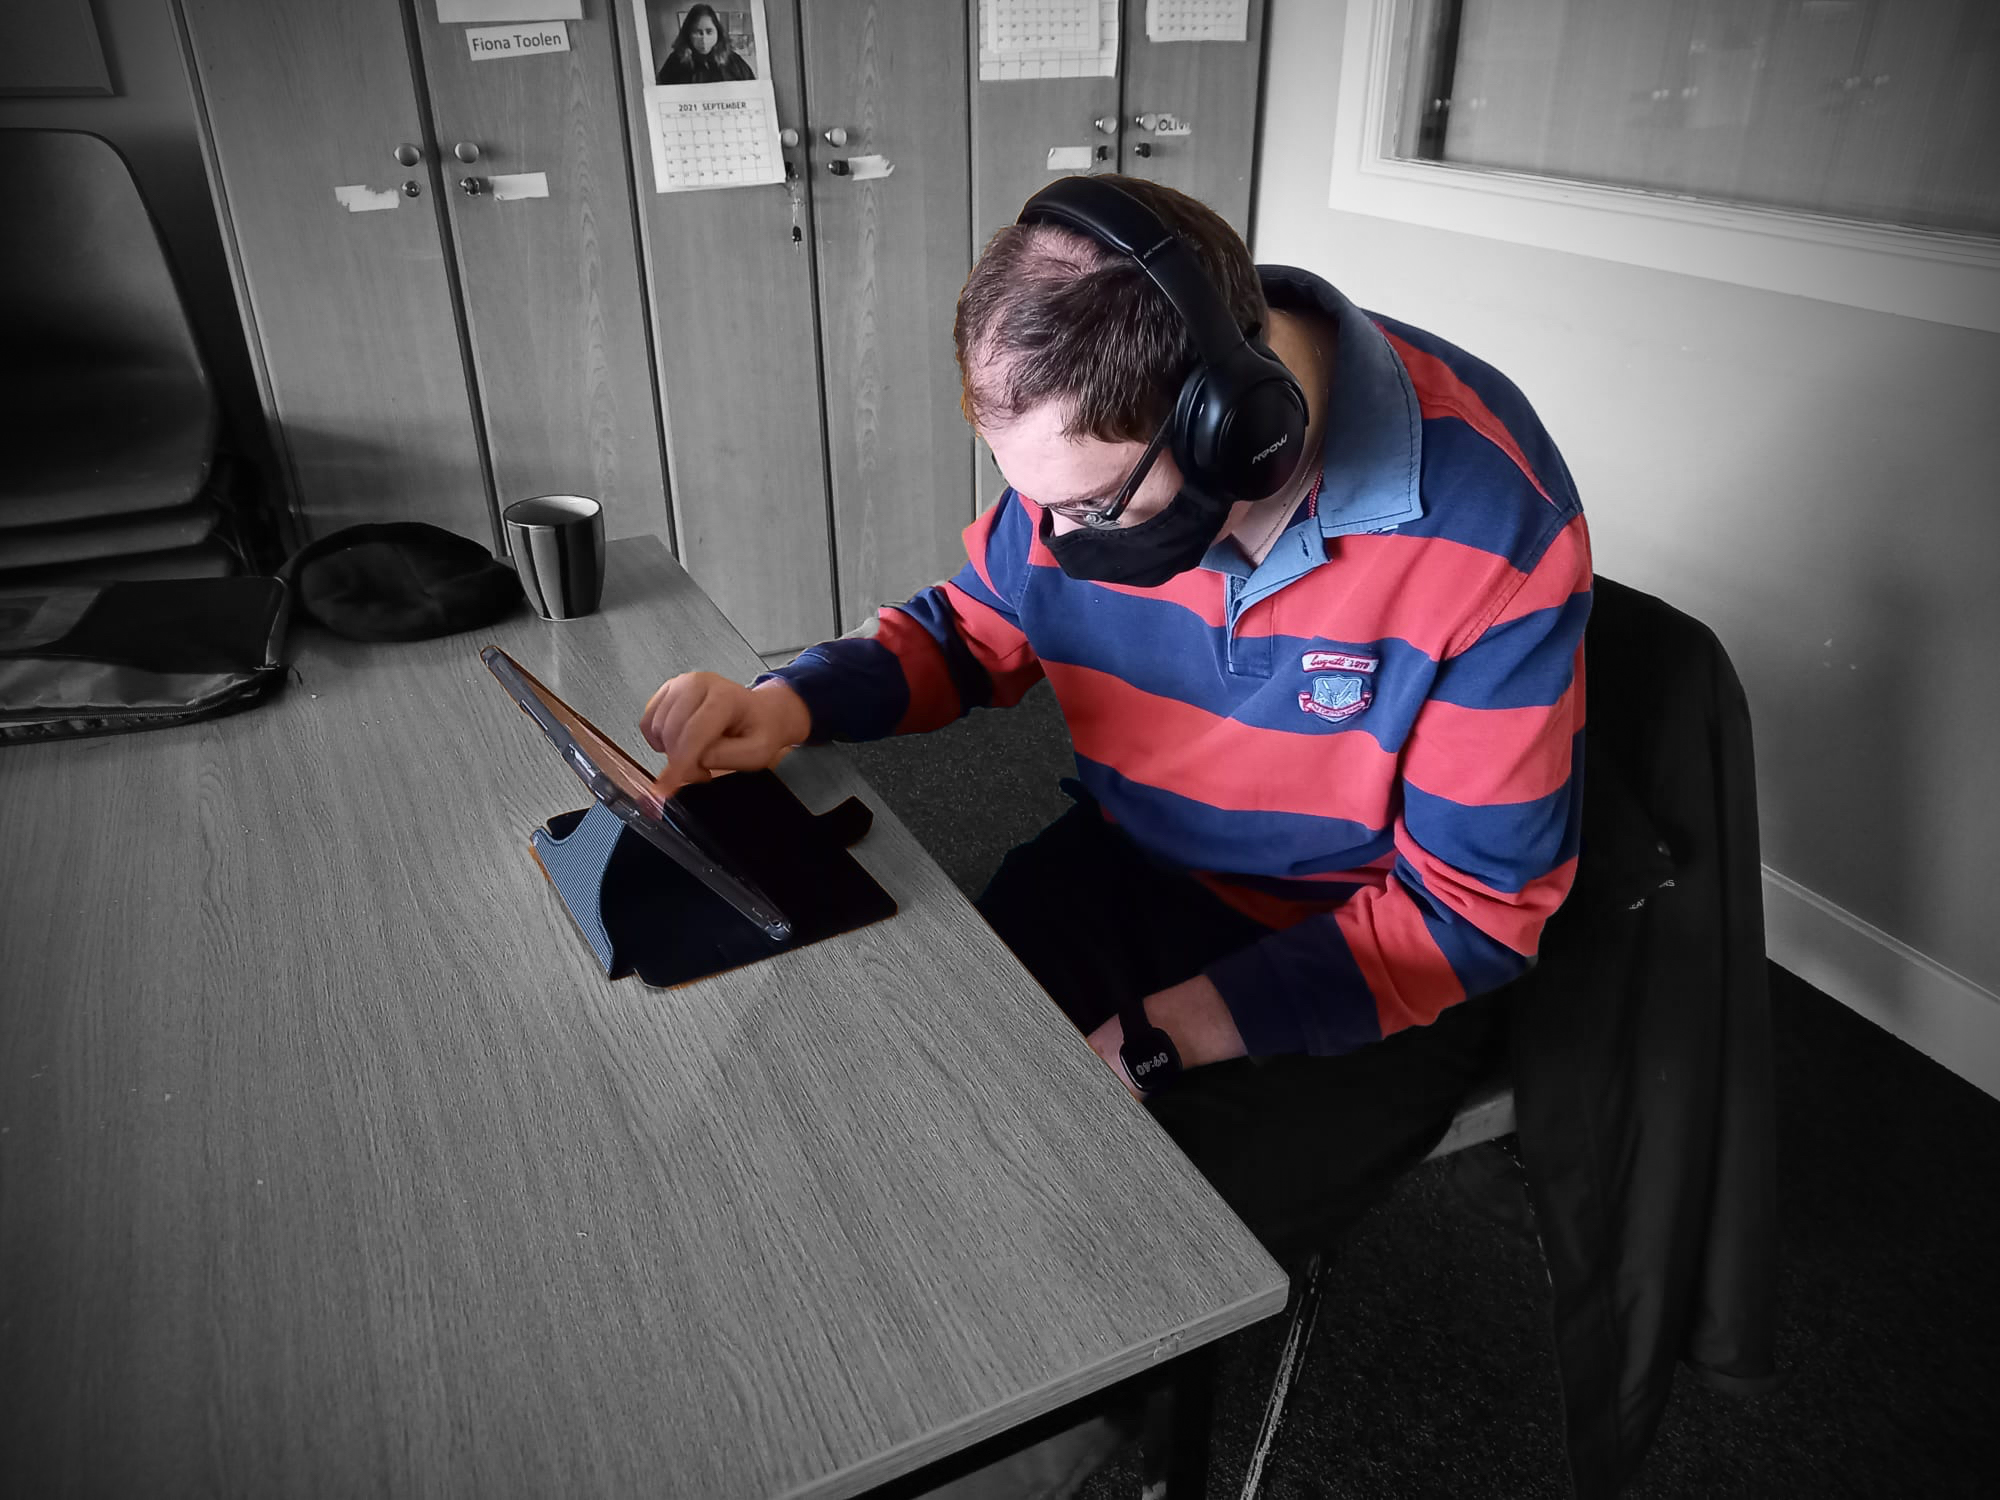 This is a photograph of one of the Sound On! Artists. He is sitting down at a table listening to sounds that he recorded using Whats App on his tablet for the Sound On! project. He is a white man in his thirties. He is wearing black headphones, black glasses a blue and red striped top with a collar, and a black face mask. There are closed presses and stacked chairs in the background. The colour of the background in the photograph has been altered to black and white.